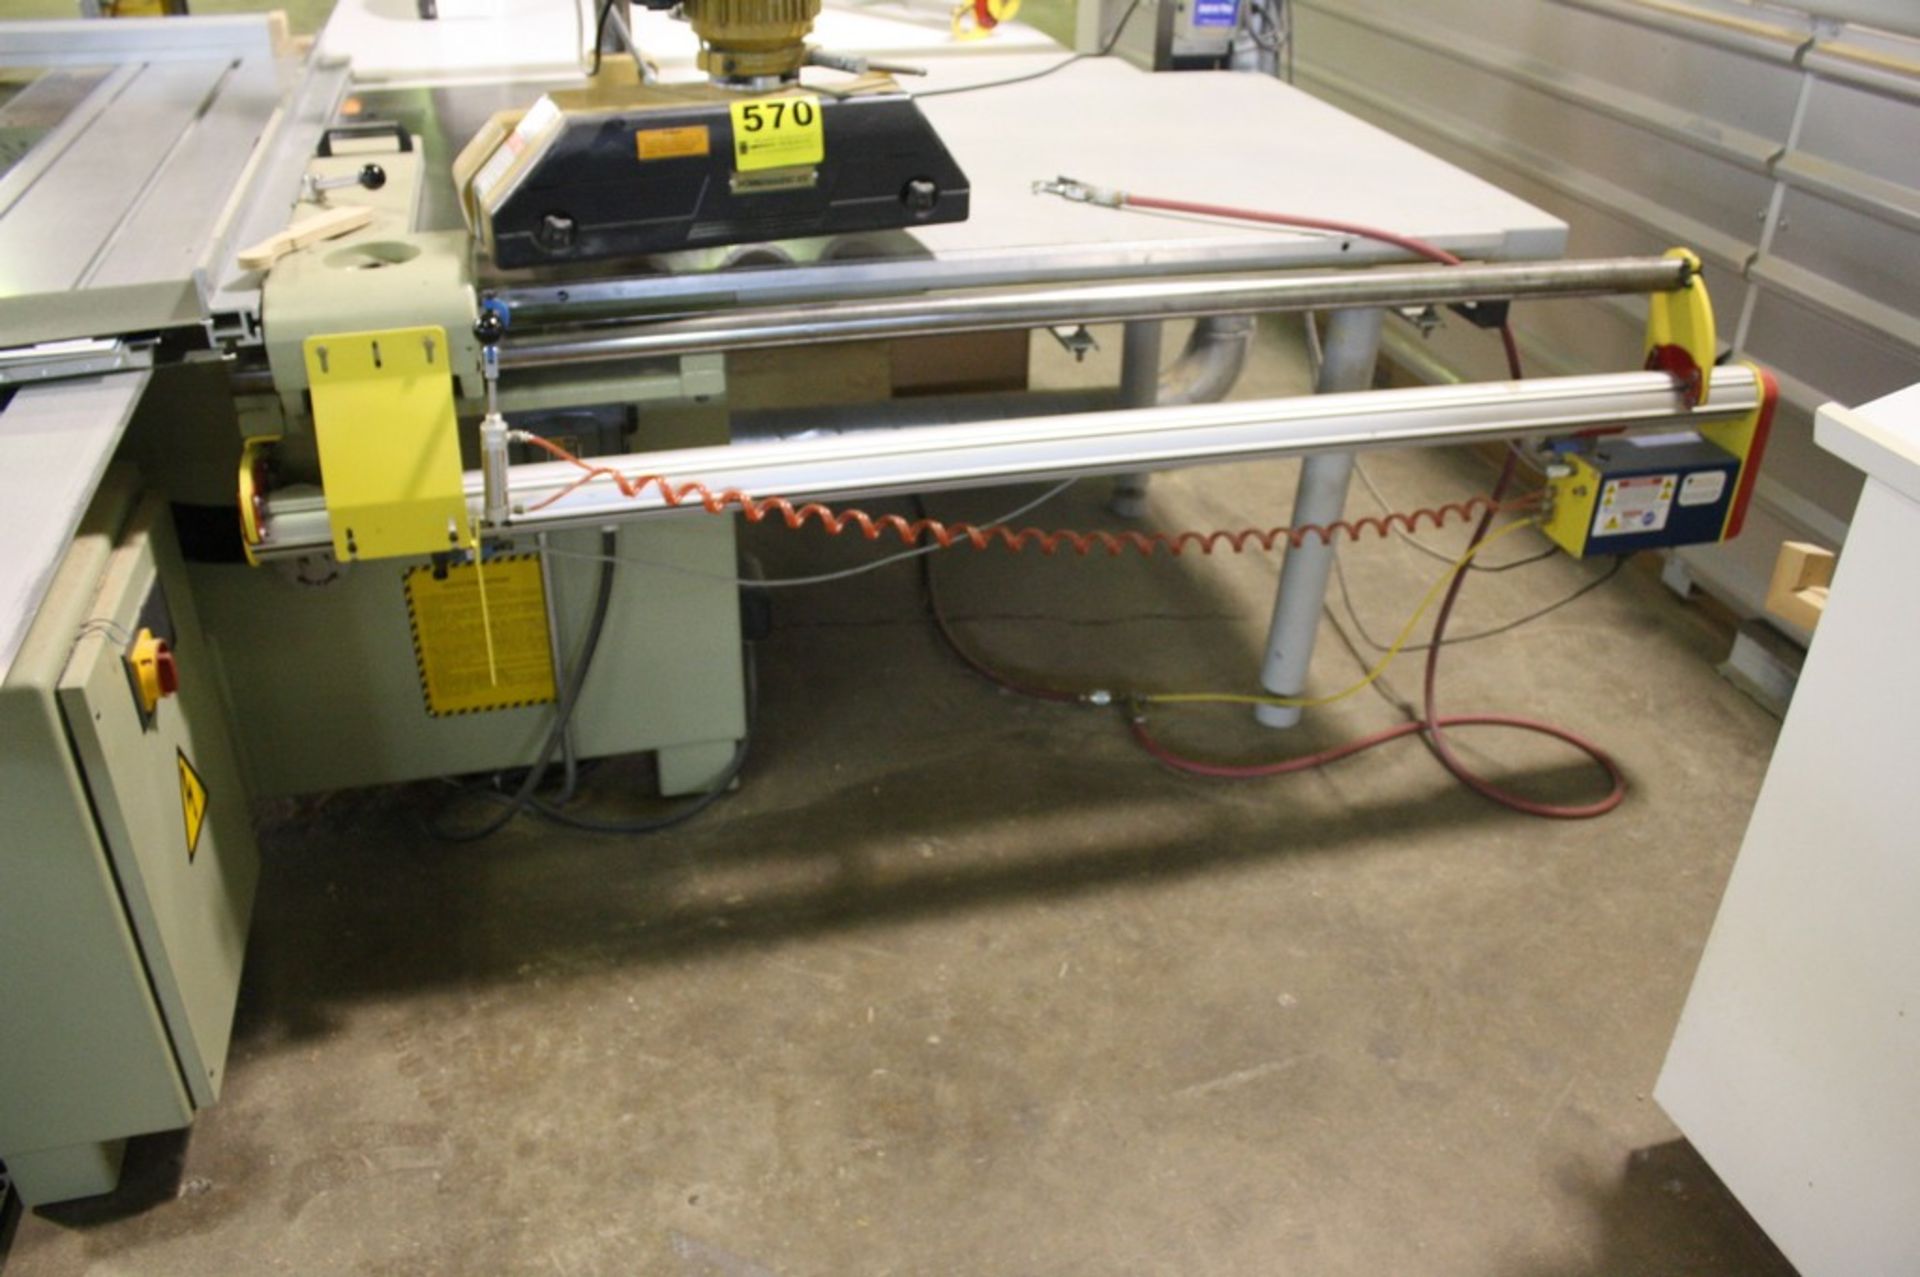 SCMI MODEL HYDRO 3200 SLIDING TILTING ARBOR TABLE SAW, S/N 010496, 126” CARRIAGE TRAVEL, 59” RIP CUT - Image 3 of 3